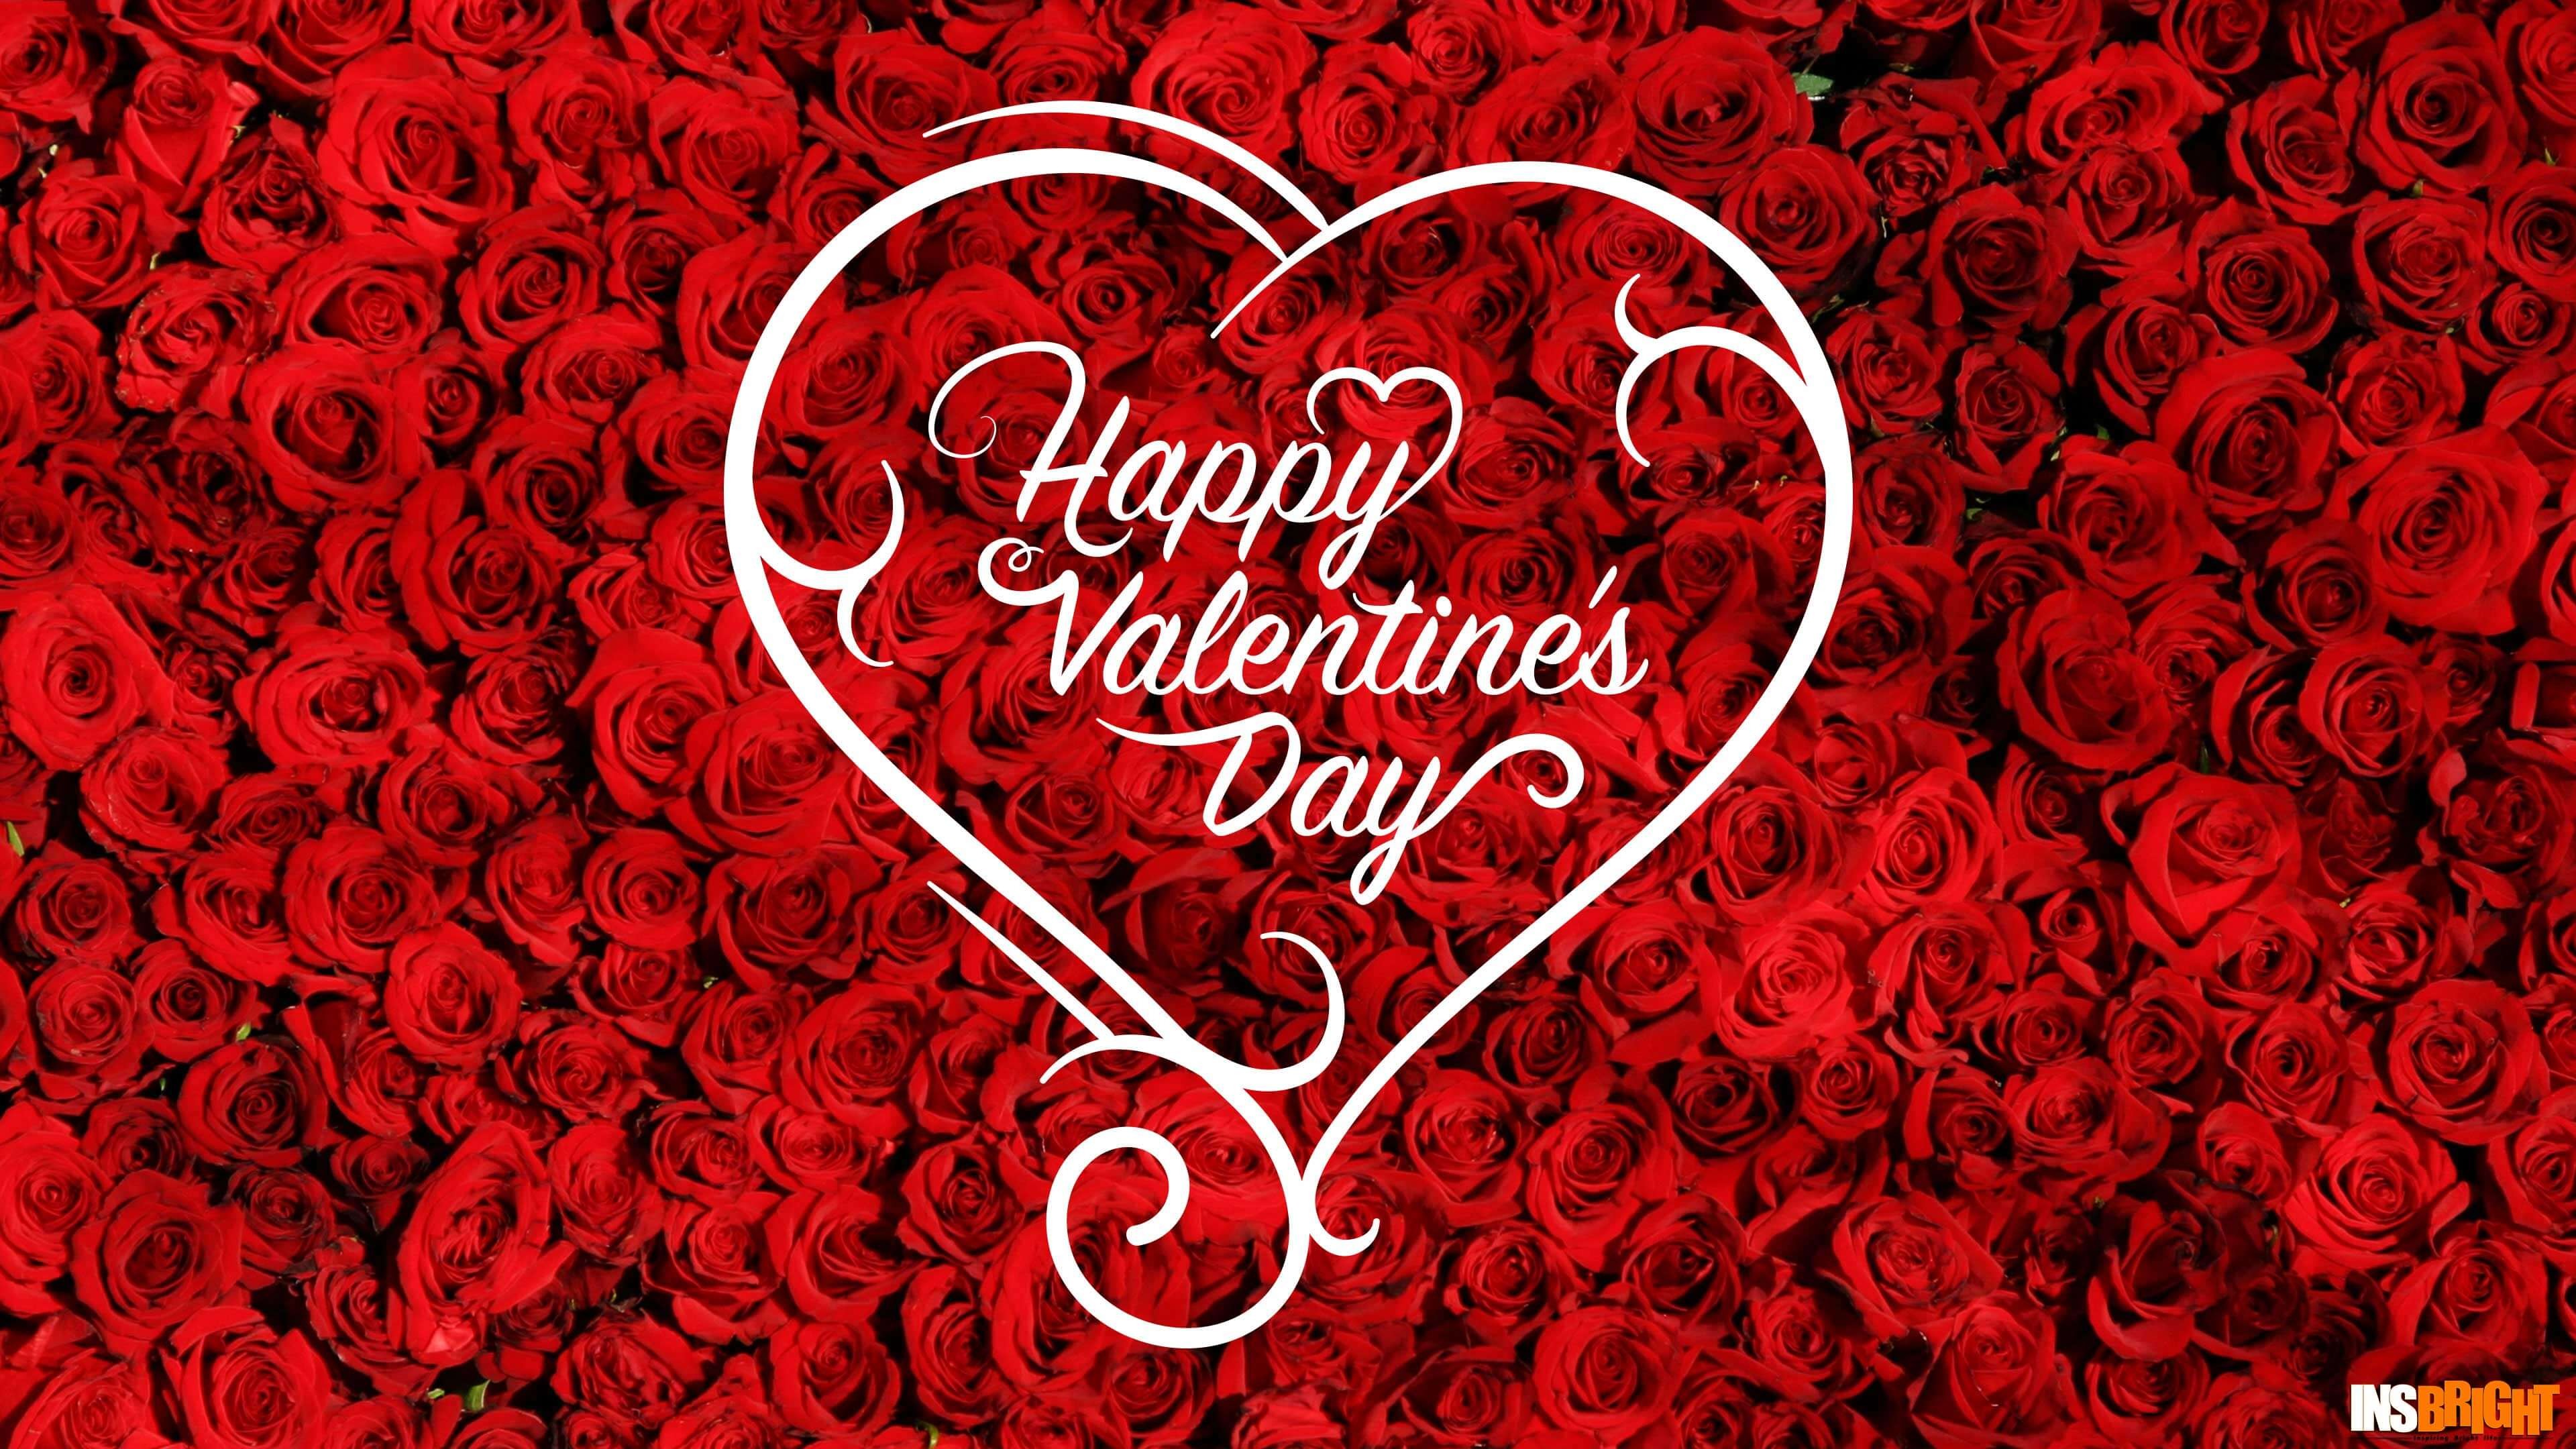 Free Download Hd Valentine S Day Wallpapers 2017 Happy - Happy Valentine's Day 2019 , HD Wallpaper & Backgrounds